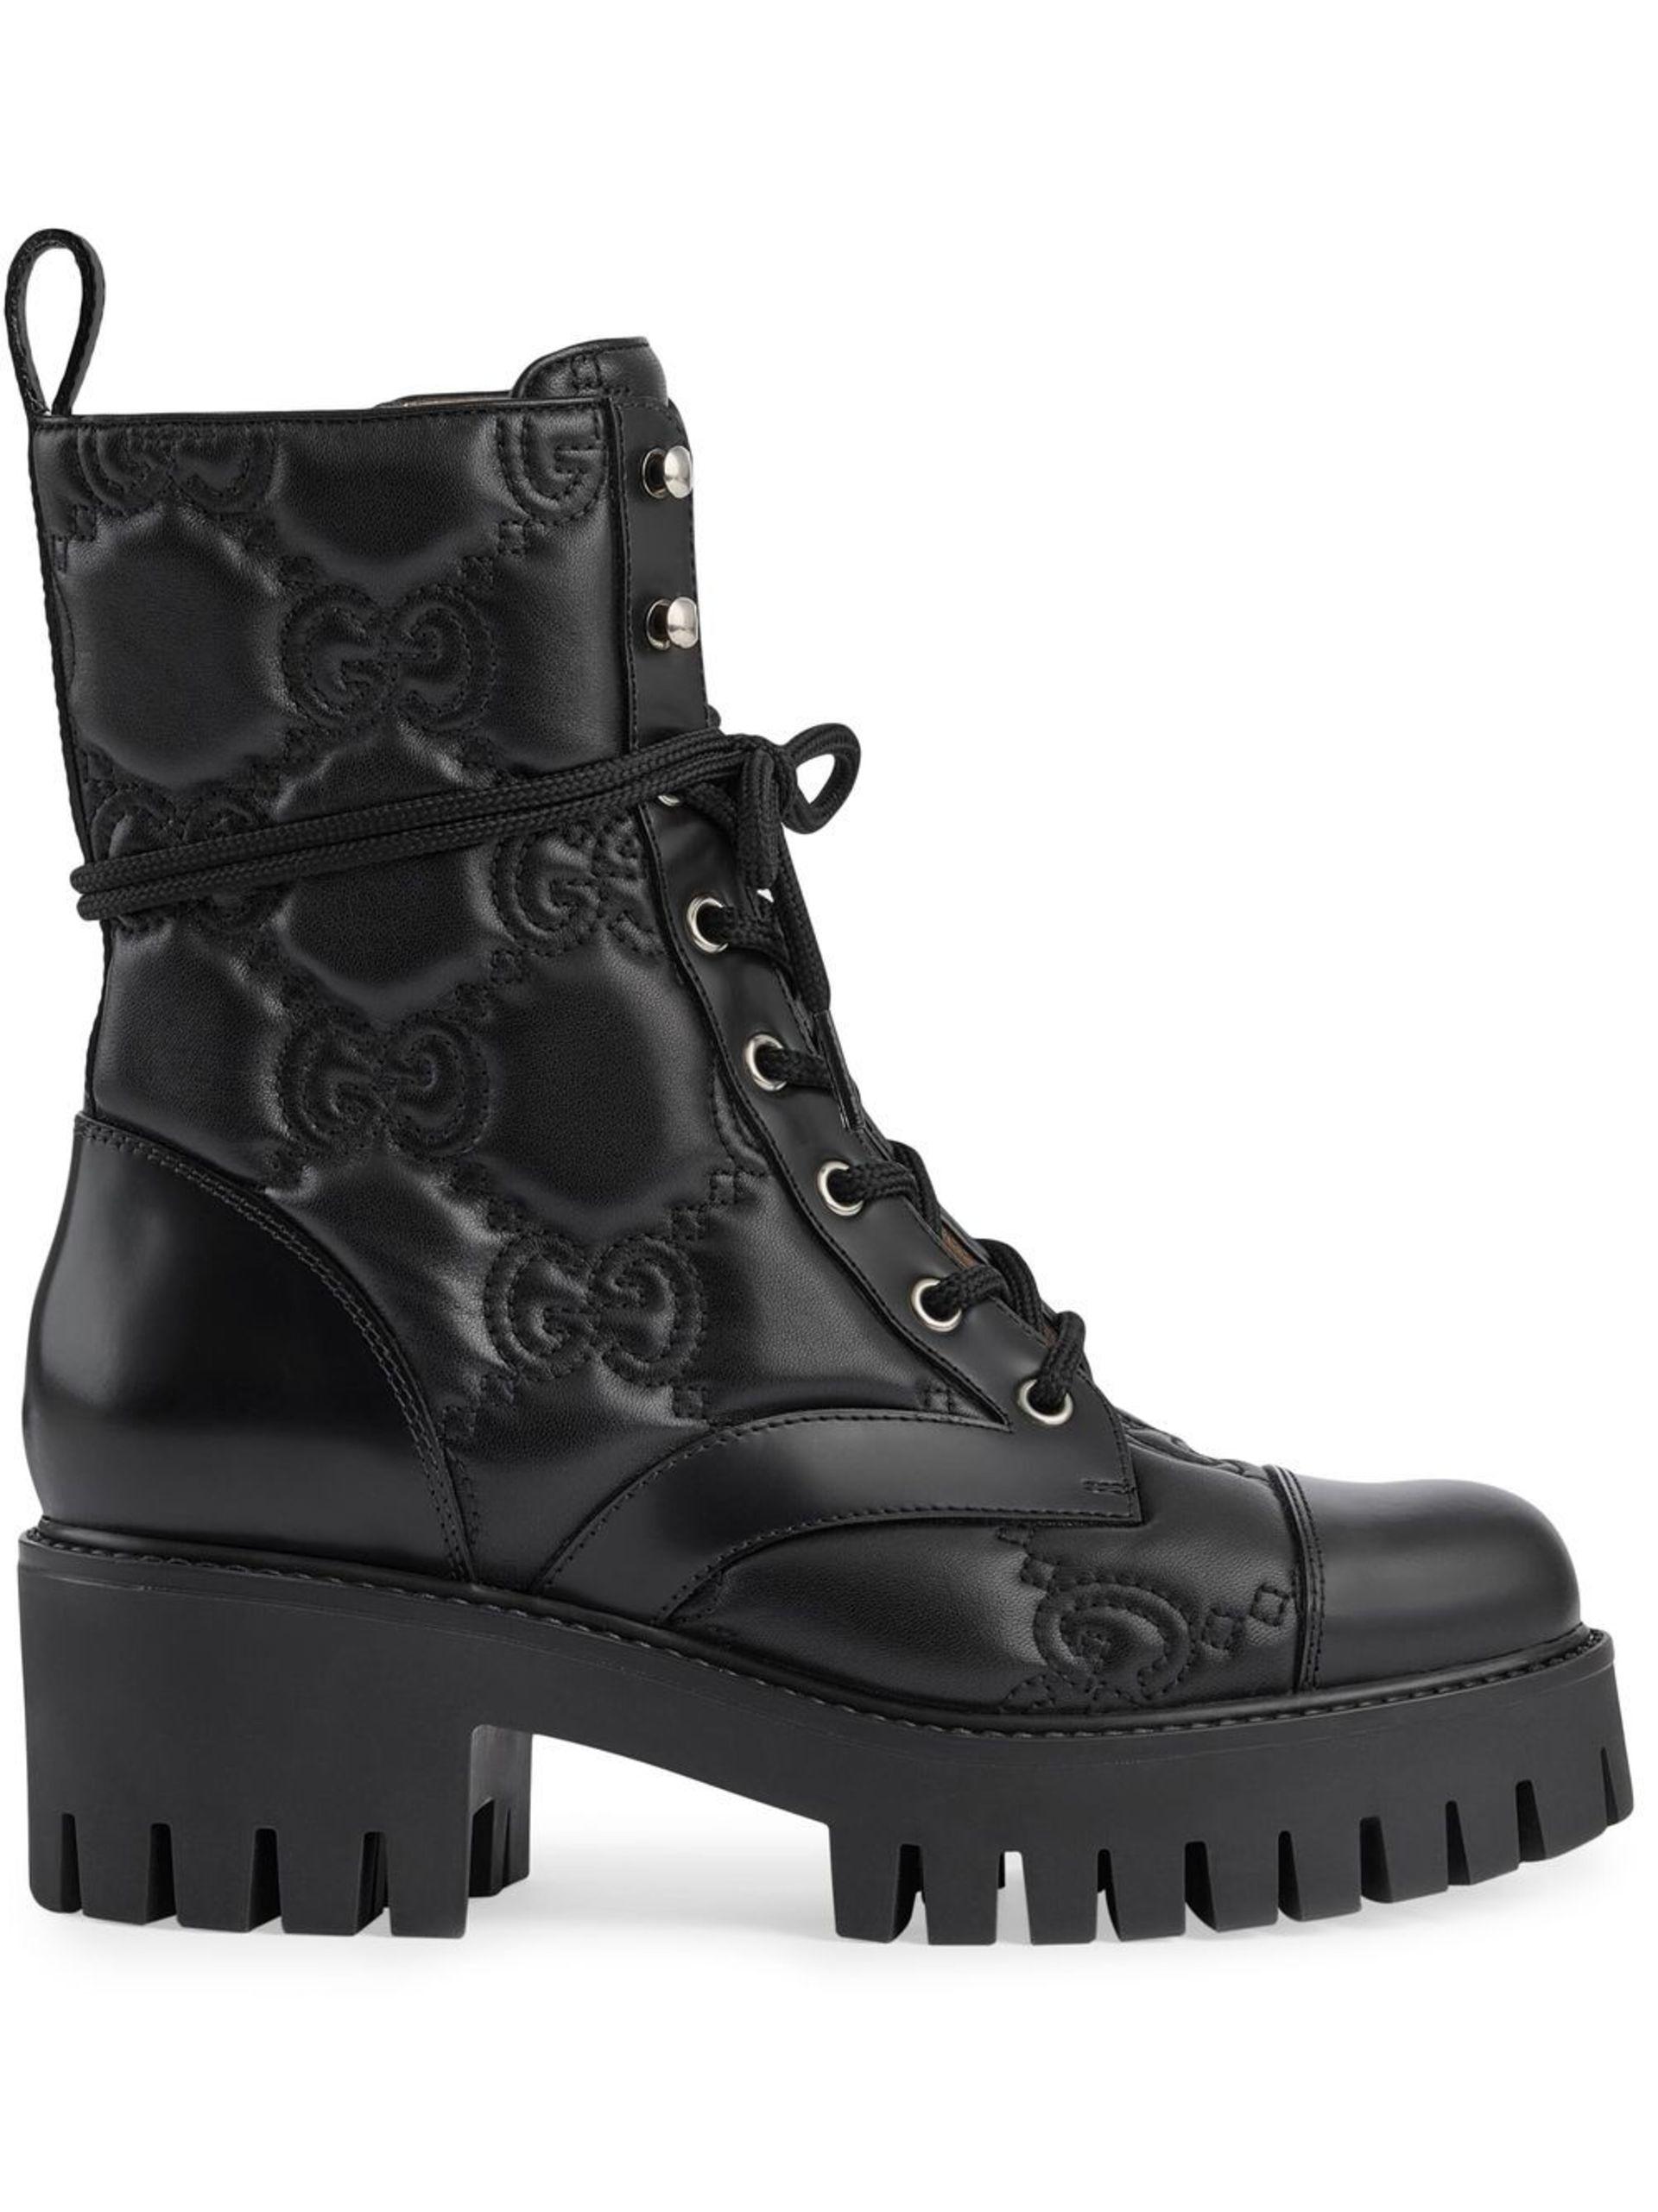 Chanel Women's Chain CC Cap Toe Lace Up Combat Boots Quilted Shiny Calfskin  Black 2139021